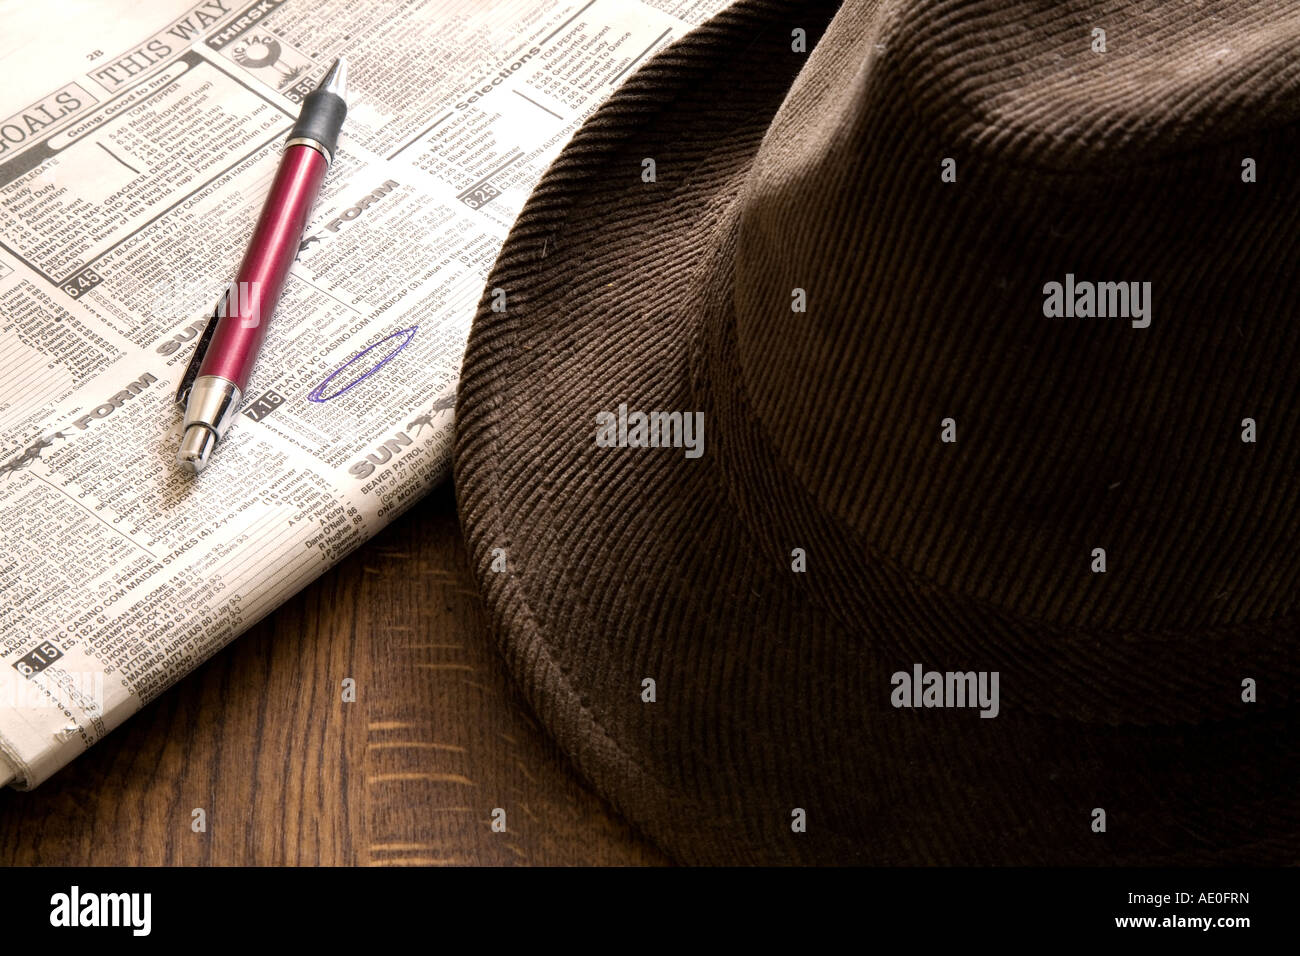 Brown hat newspaper and pen on the horse racing page Stock Photo